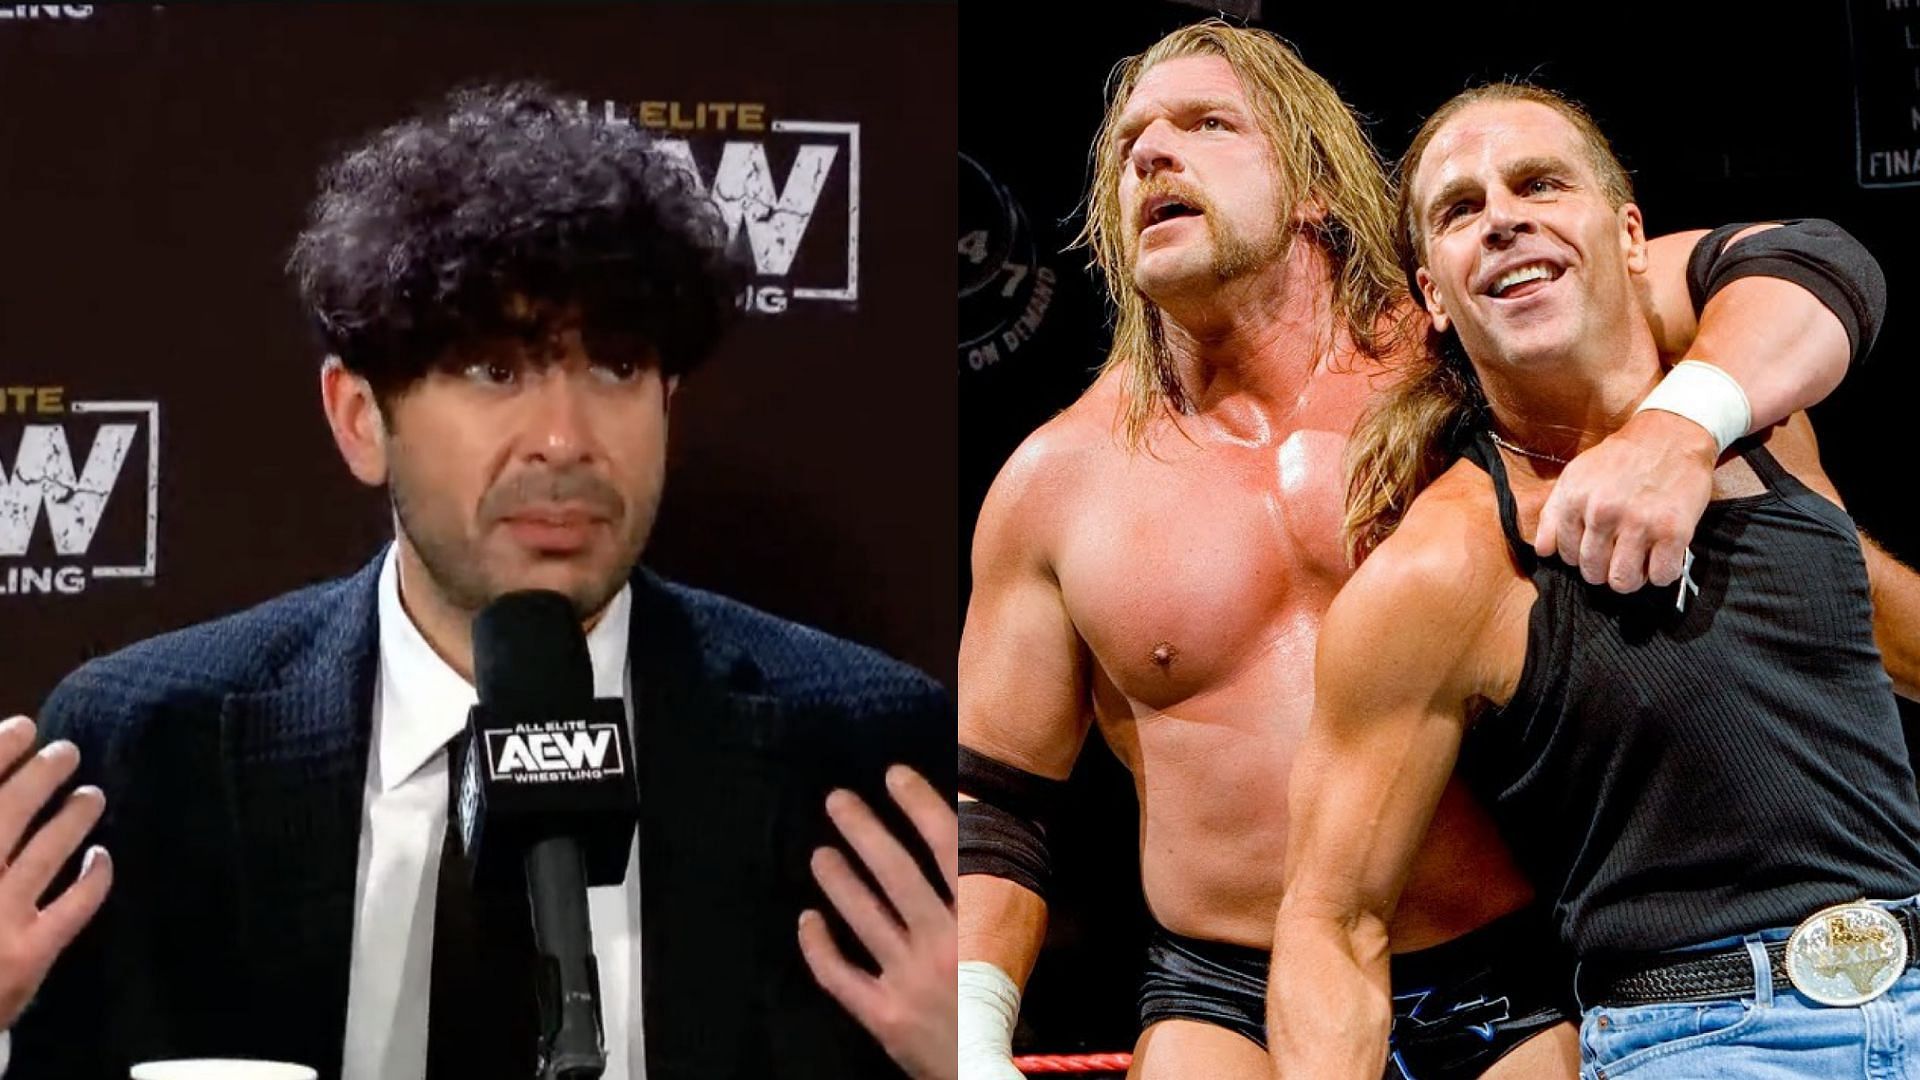 Did Tony Khan make a better impression on this star than Triple H and Shawn Michaels?